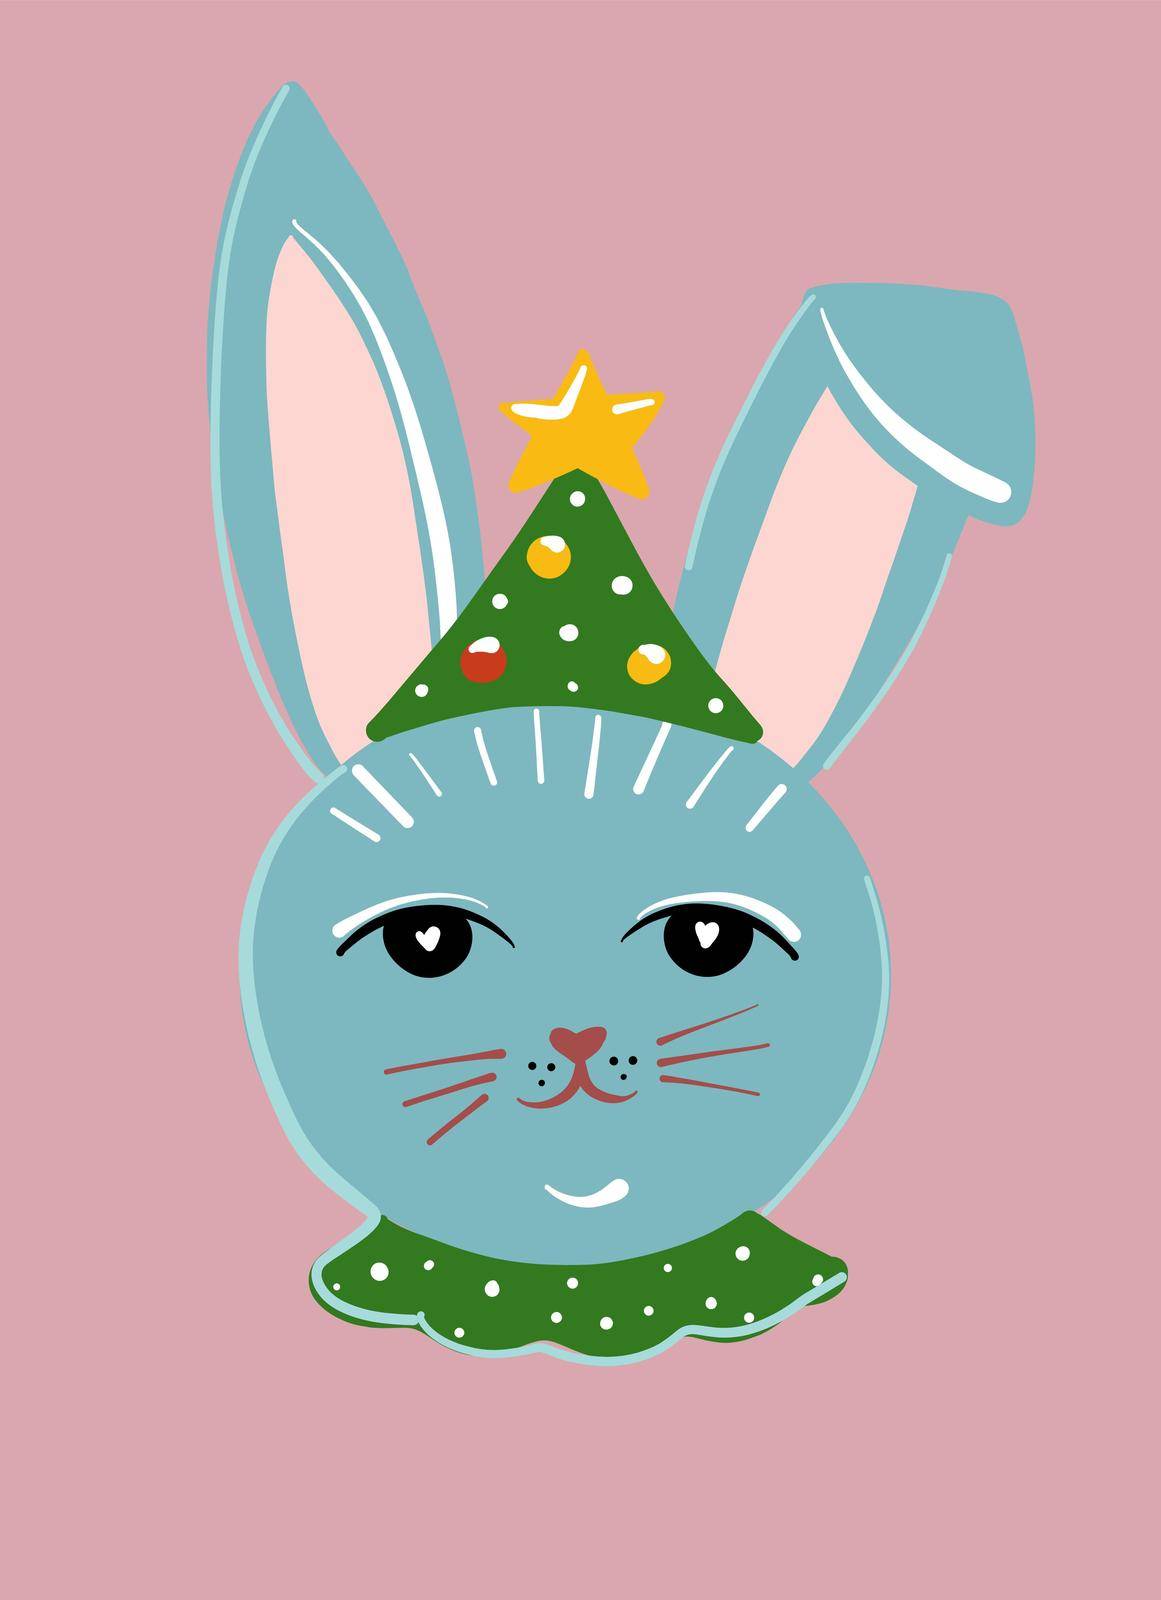 Cute blue rabbit in a festive hat. He s a Christmas tree. The head of a rabbit in the cartoon style. Illustration, vector.